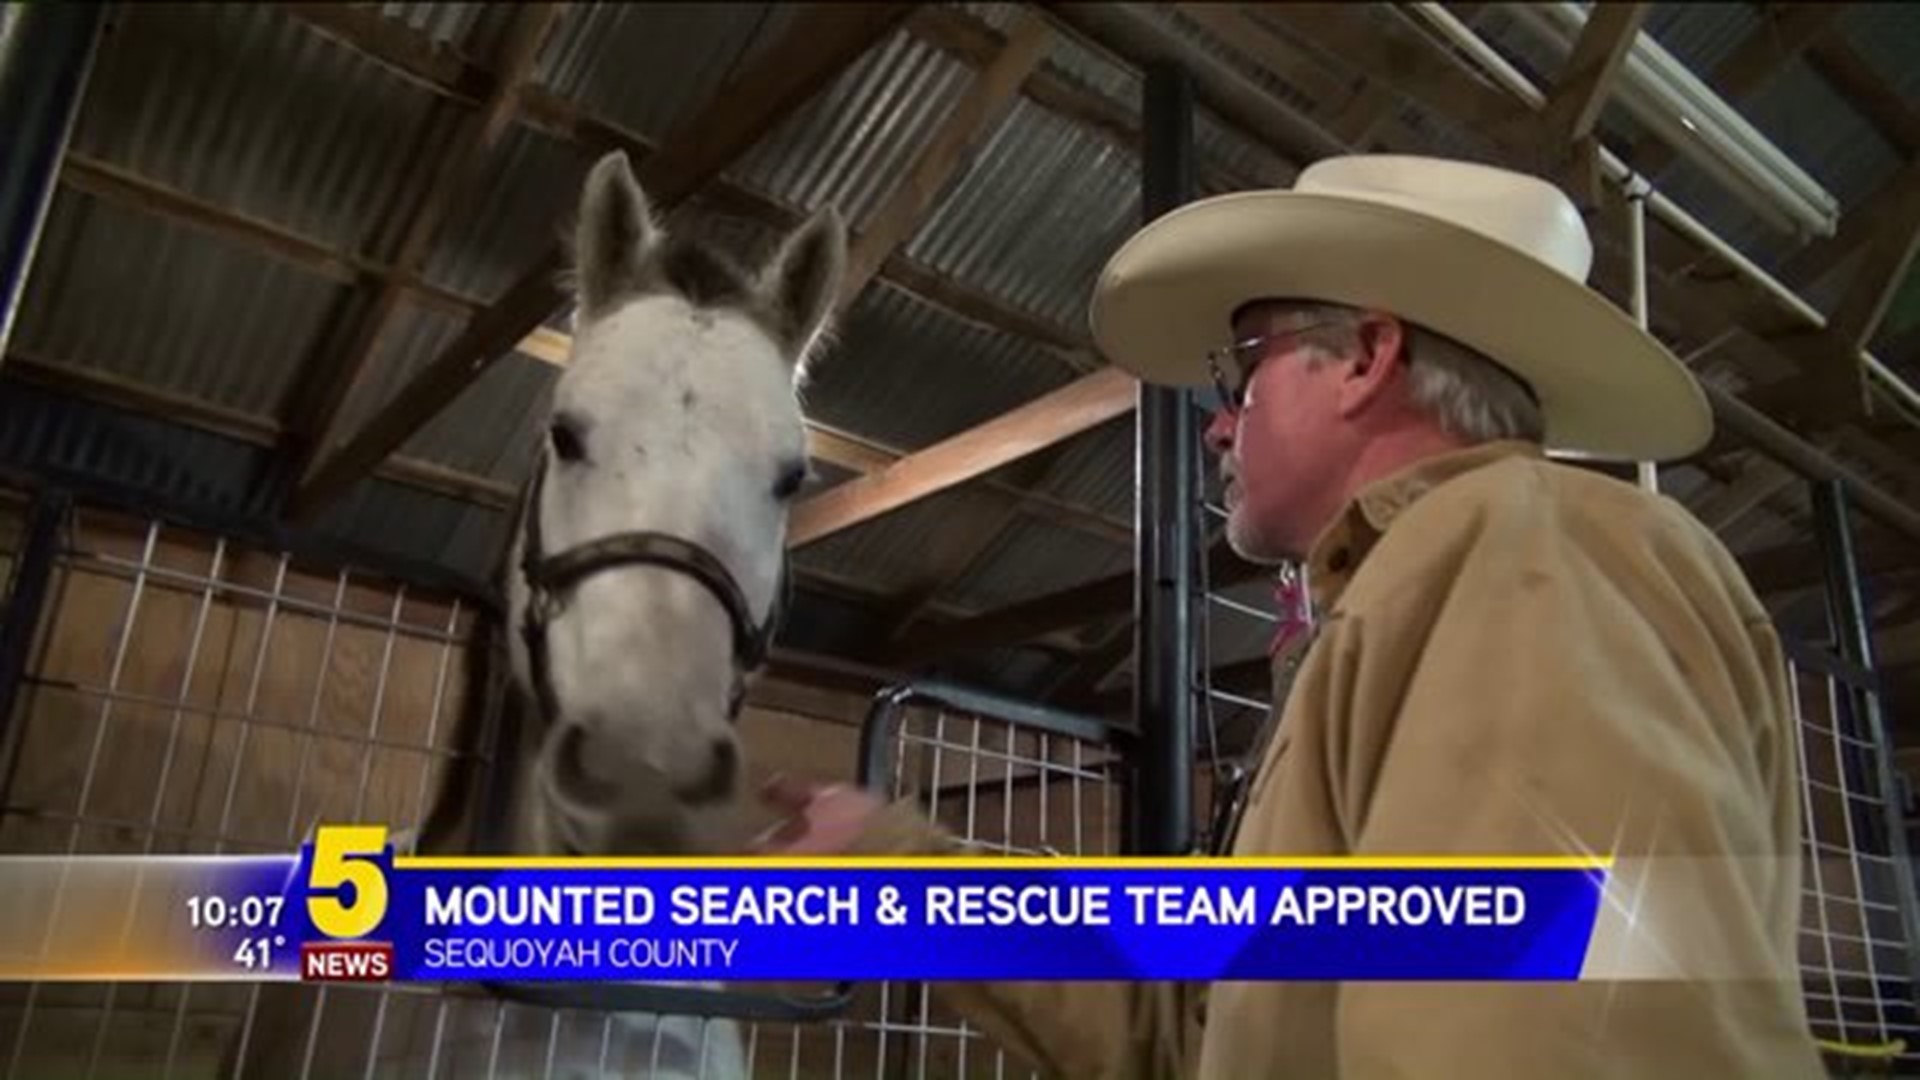 Mounted Search and Rescue Team Approved